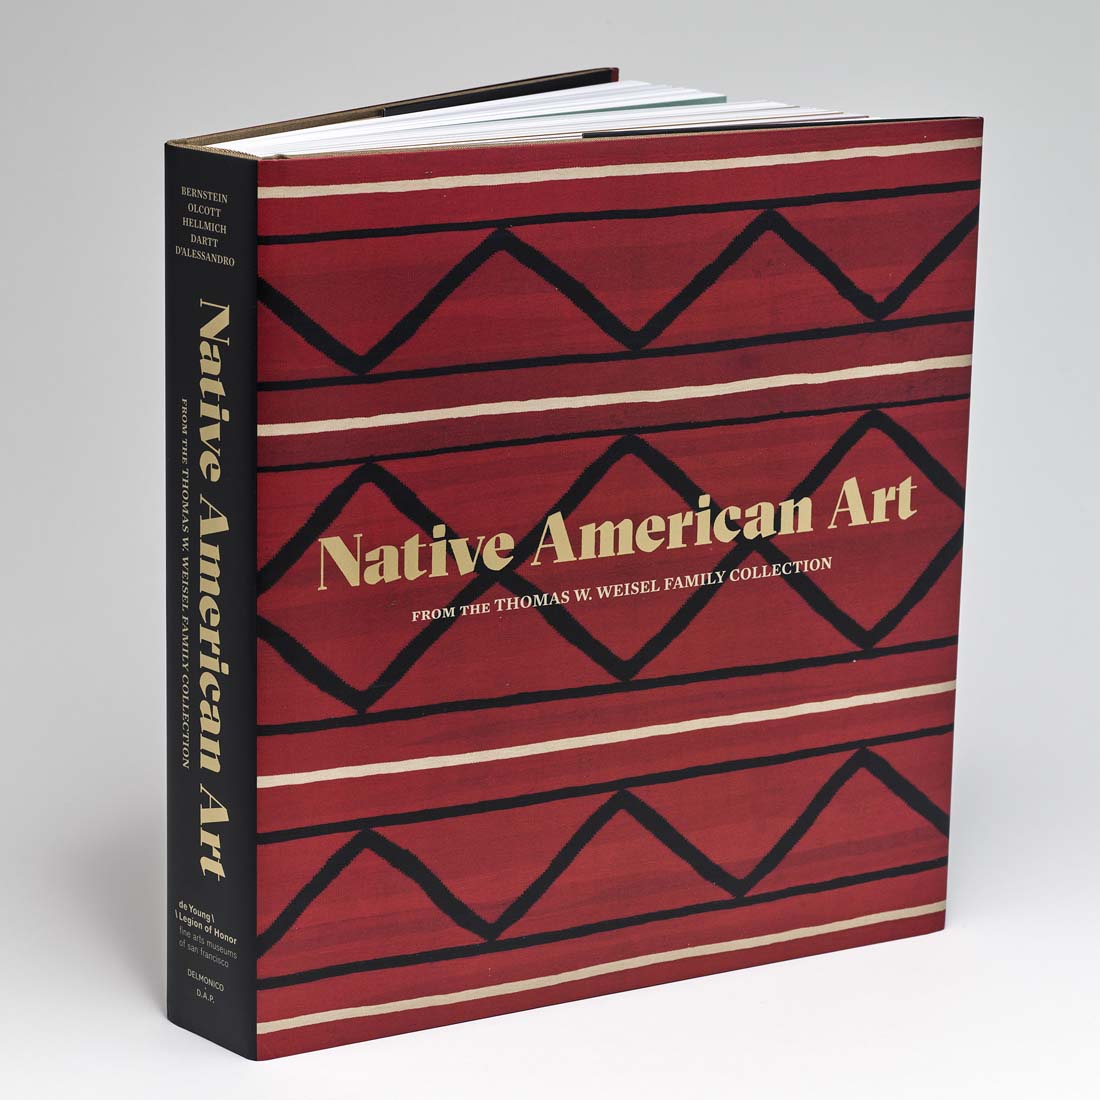 Native American Art: From the Thomas W. Weisel Family Collection